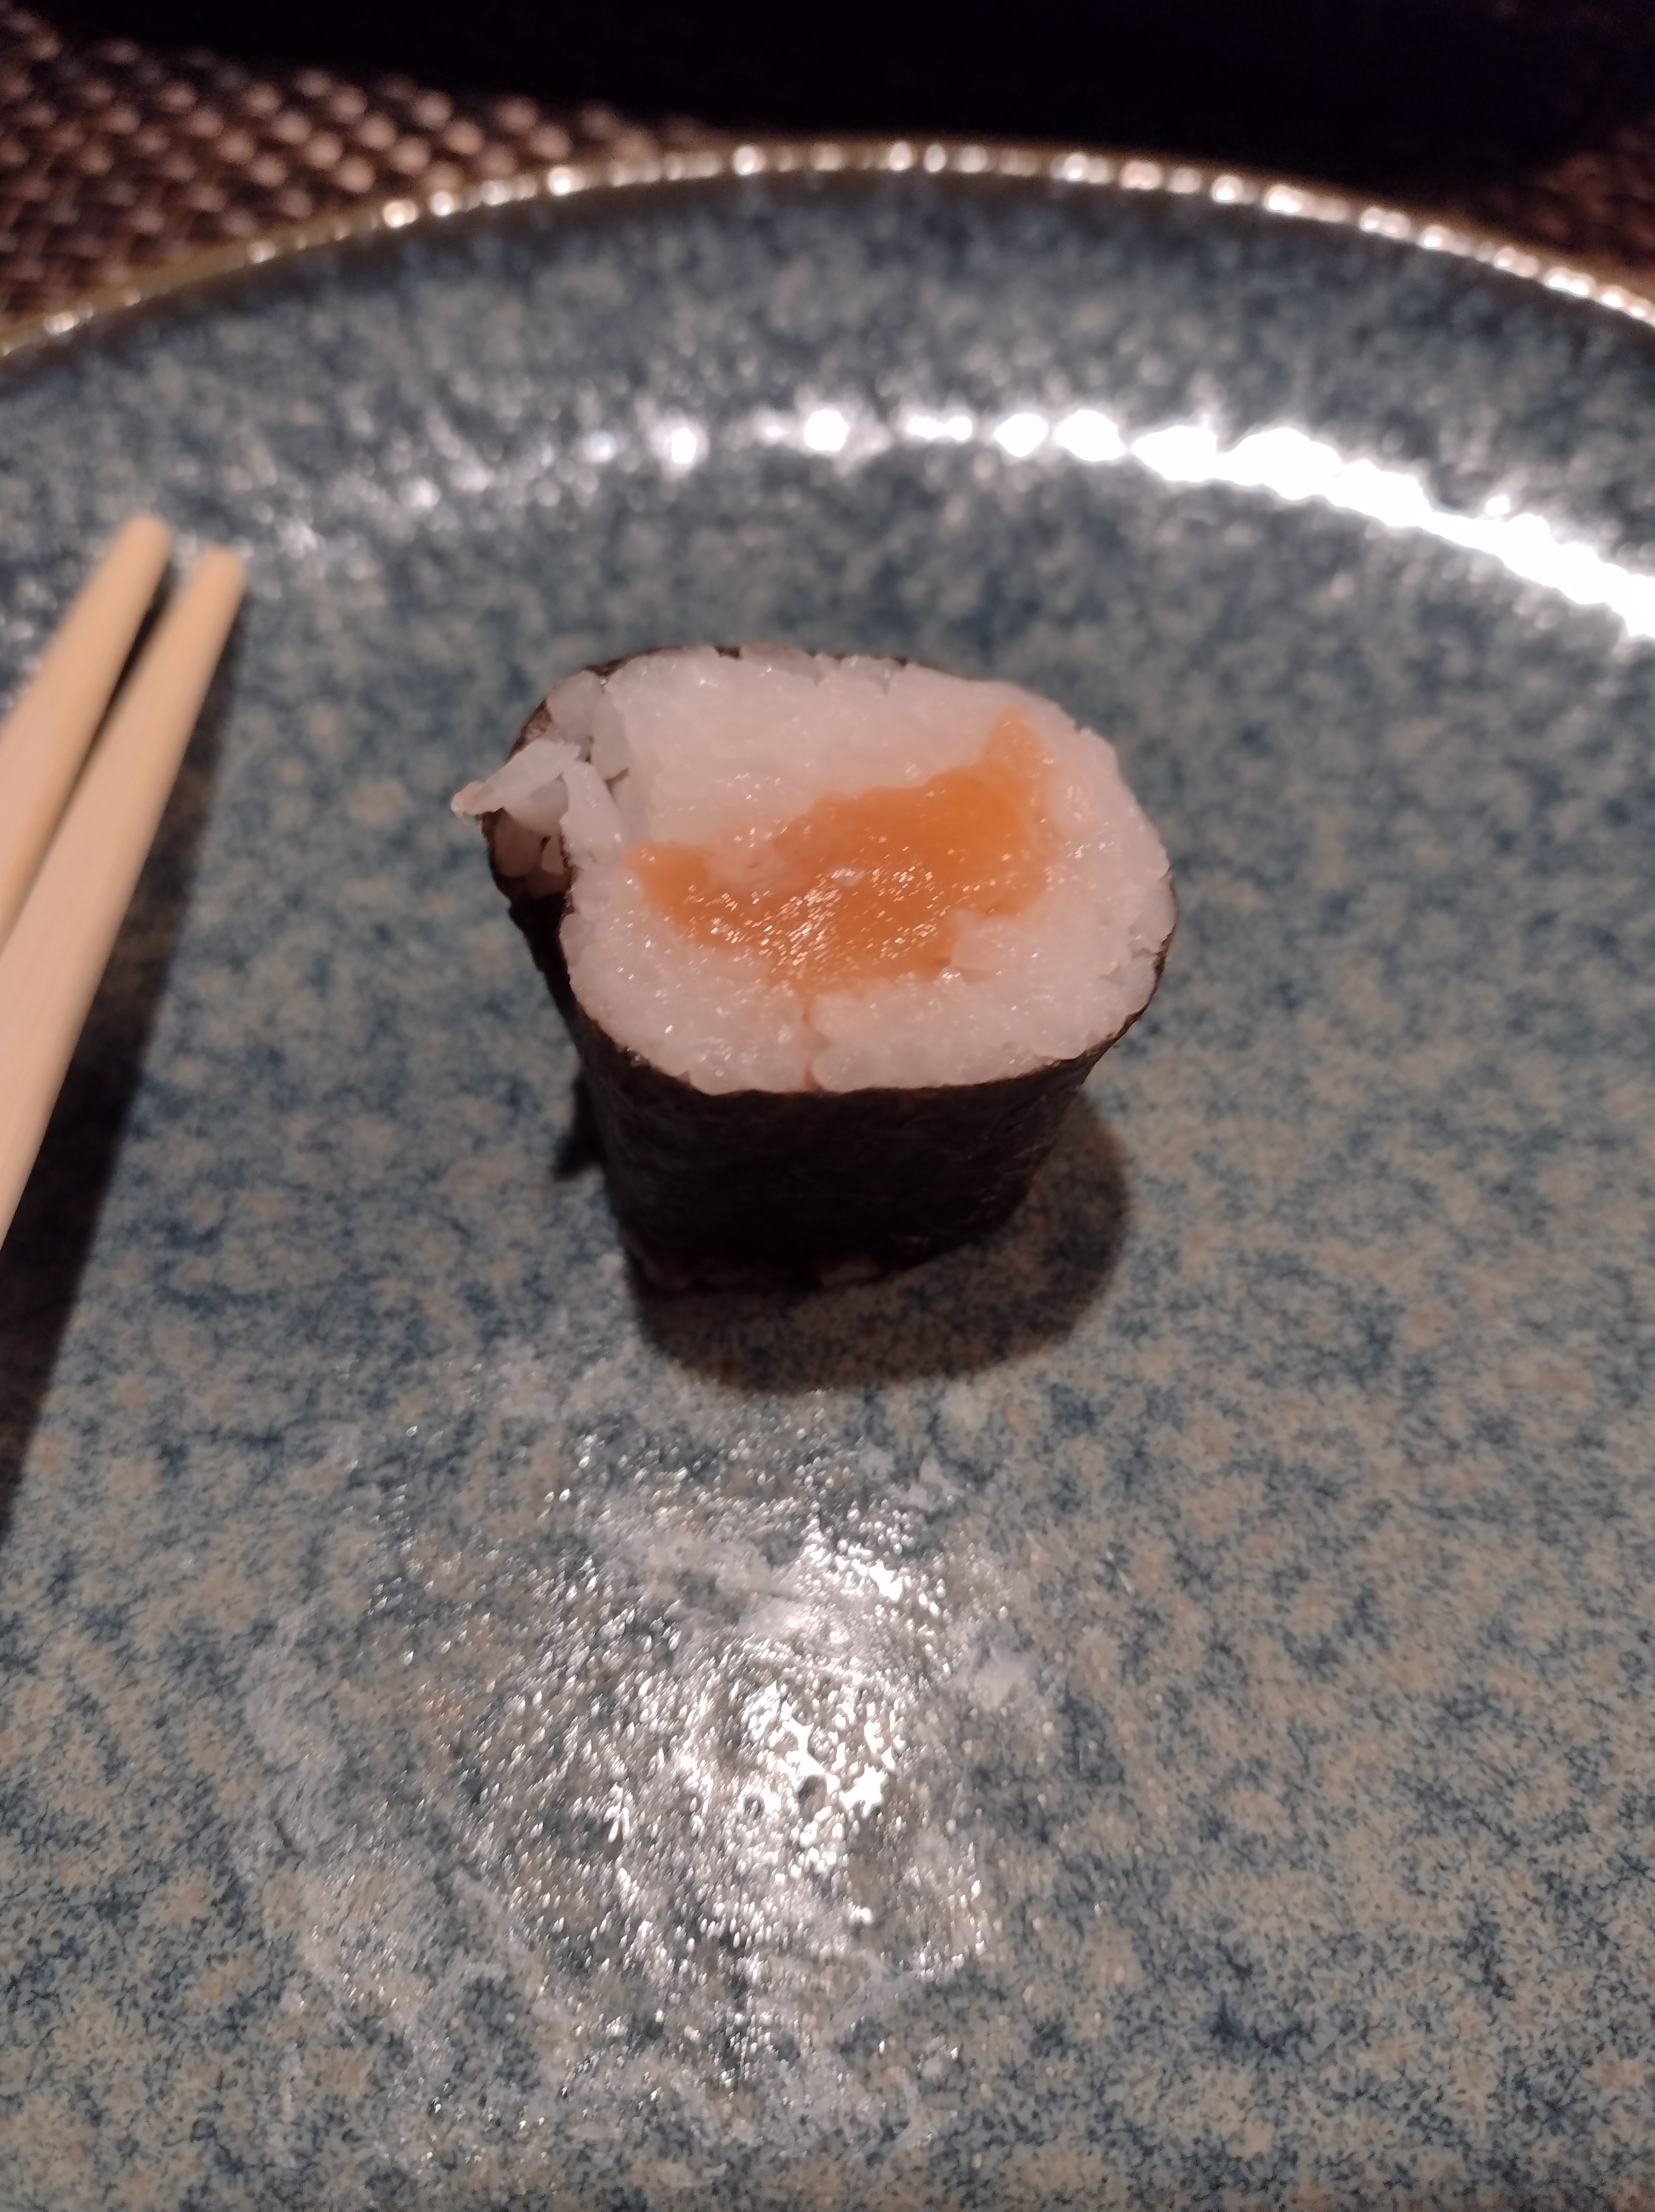 One piece of salmon sushi sits on a blue plate. Photo by Melkior Ornik.